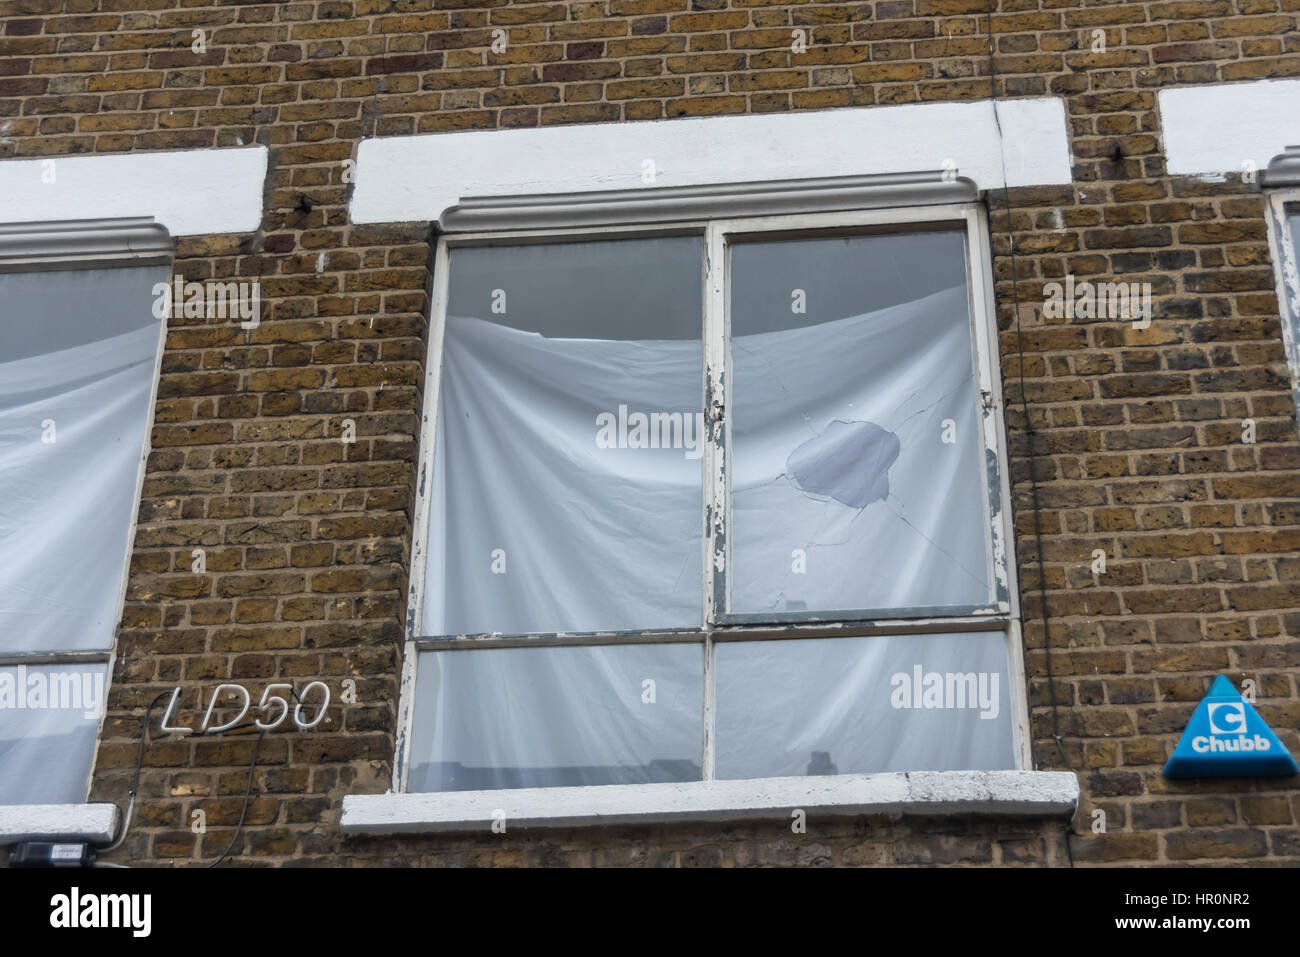 London, UK. 25th February 2017. A broken window at the first-floor LD50 gallery in Dalston where several hundred people from East London gather outside. They say the gallery s in one of London's more diverse areas has promoted fascists, neo-Nazis, misogynists, racists and Islamophobes, and the gallery, whose name refers to the dose of any substance required to kill 50% of those taking it, 'has been responsible for one of the most extensive neo-Nazi cultural programmes to appear in London in the last decade.' The protesters want the gallery to be closed. Credit: Peter Marshall/Alamy Live News Stock Photo